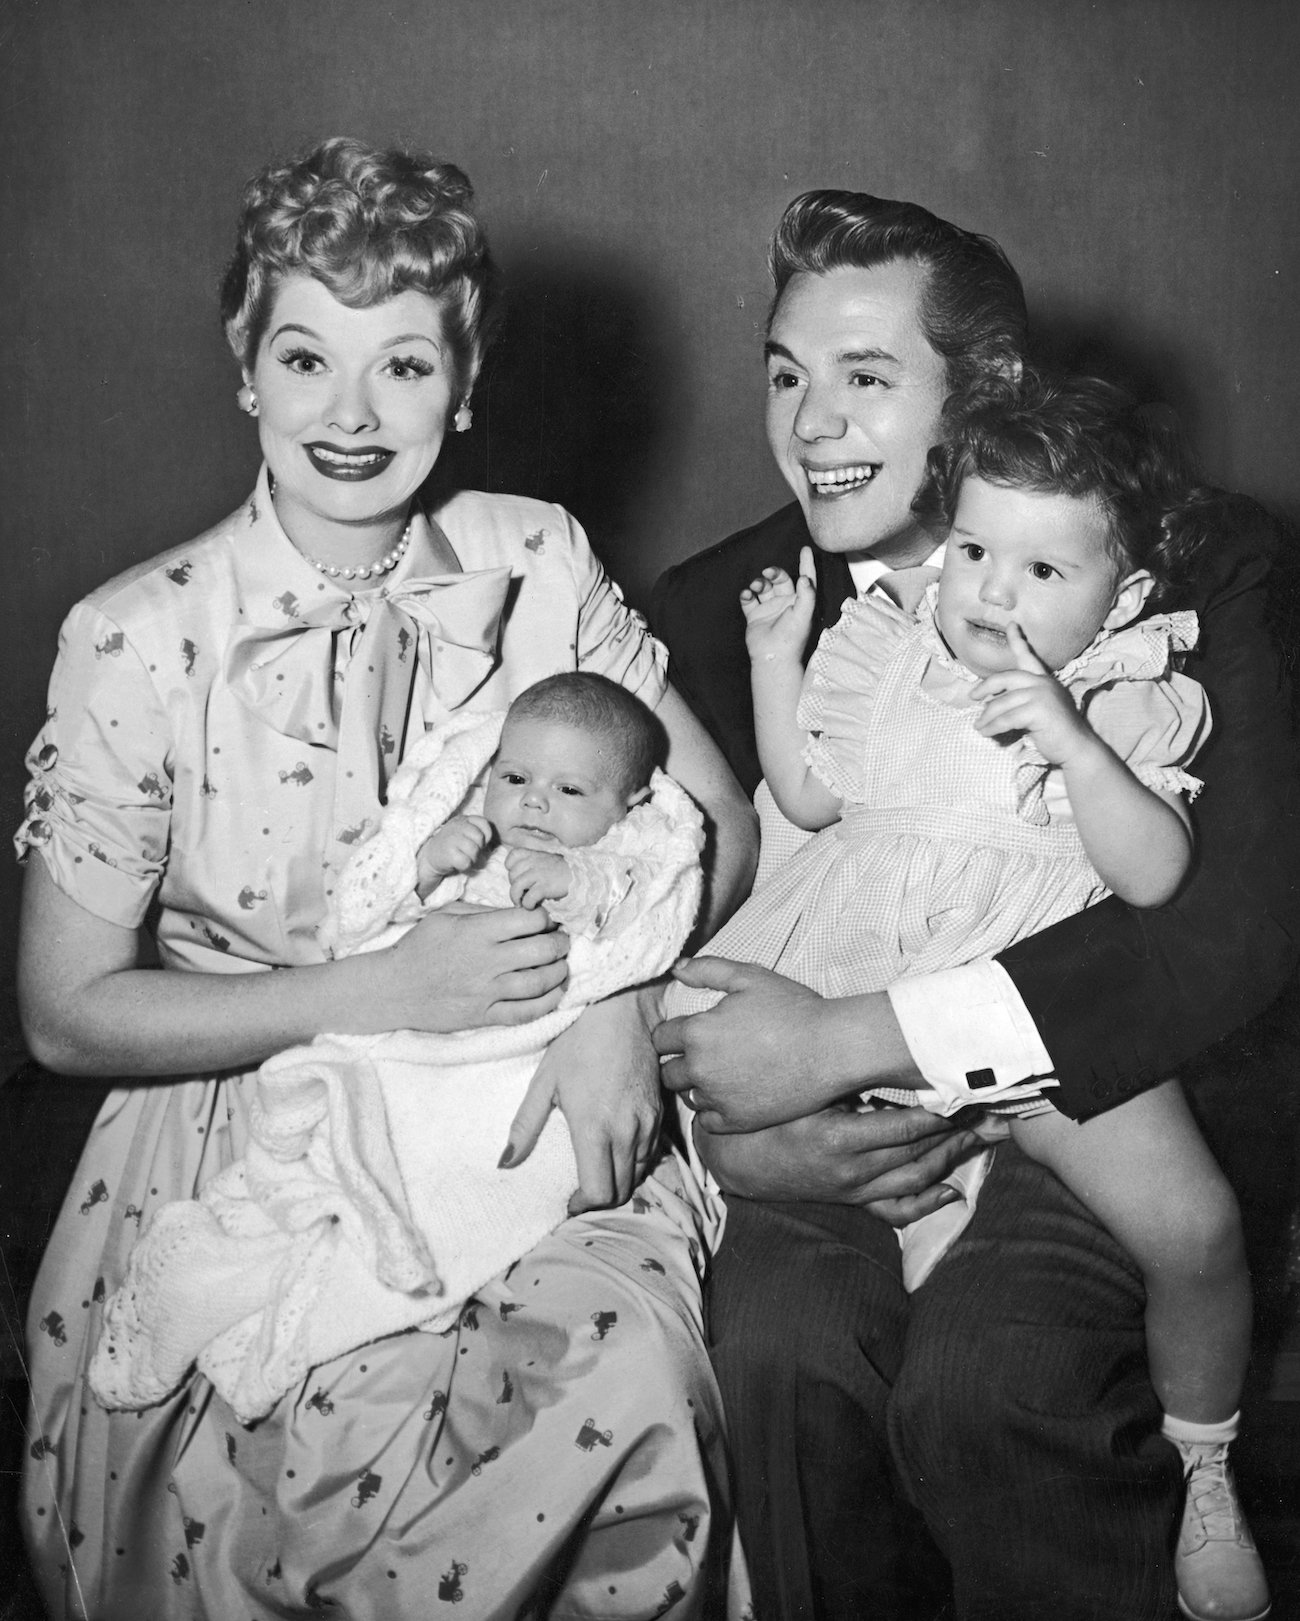 Lucille Ball and Desi Arnaz with their children Desi Jr. and Lucie